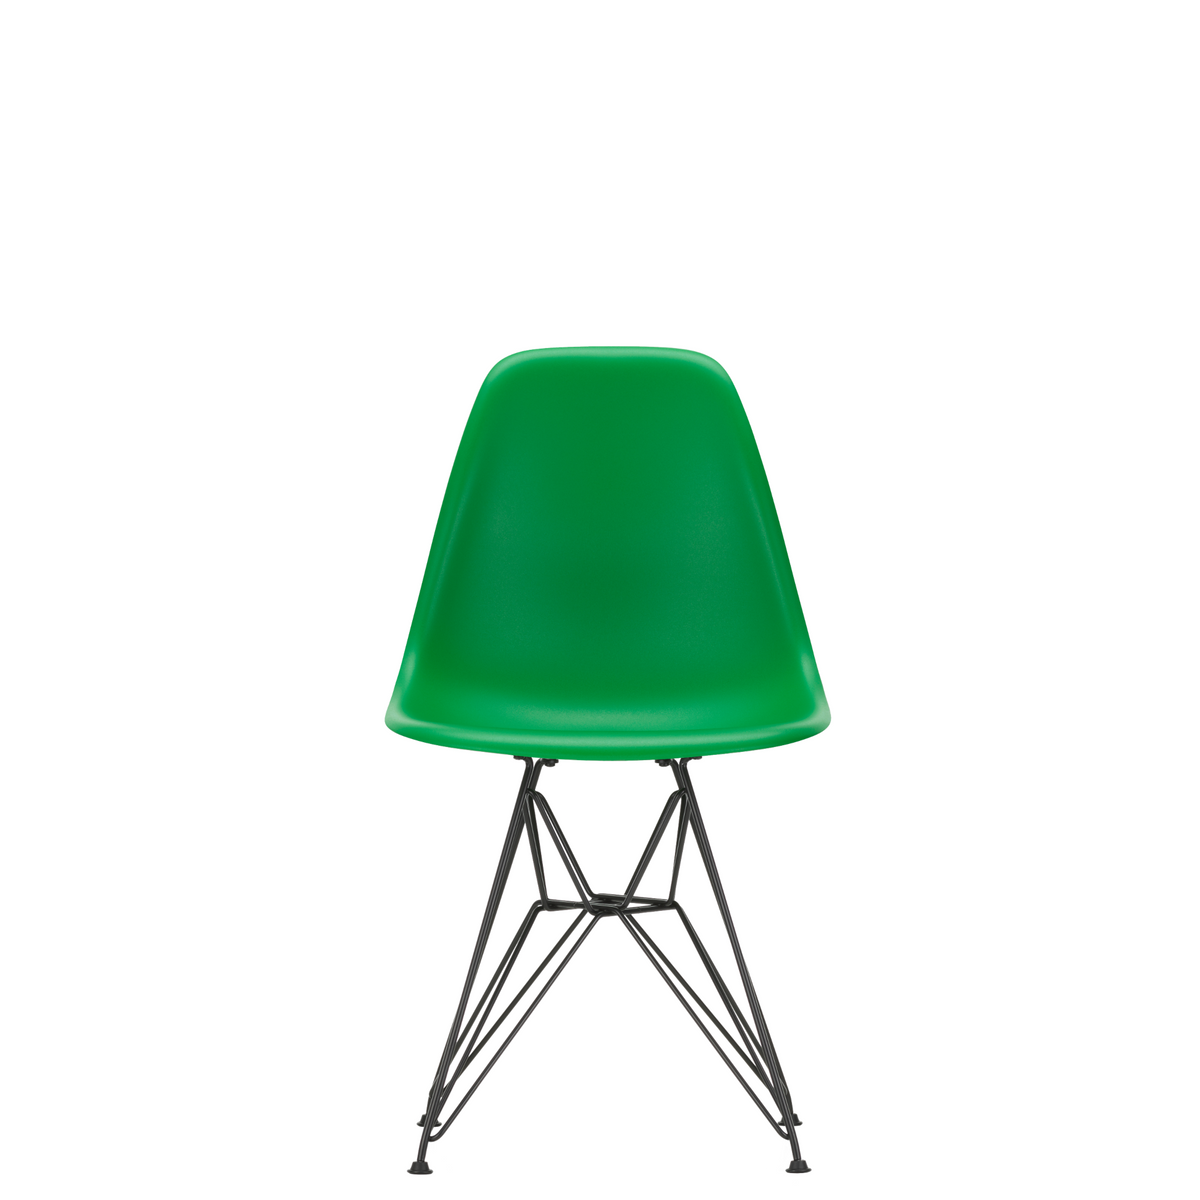 Vitra Eames Plastic Side Chair DSR Powder Coated for Outdoor Use Pale Green Shell Black Powdercoated Base